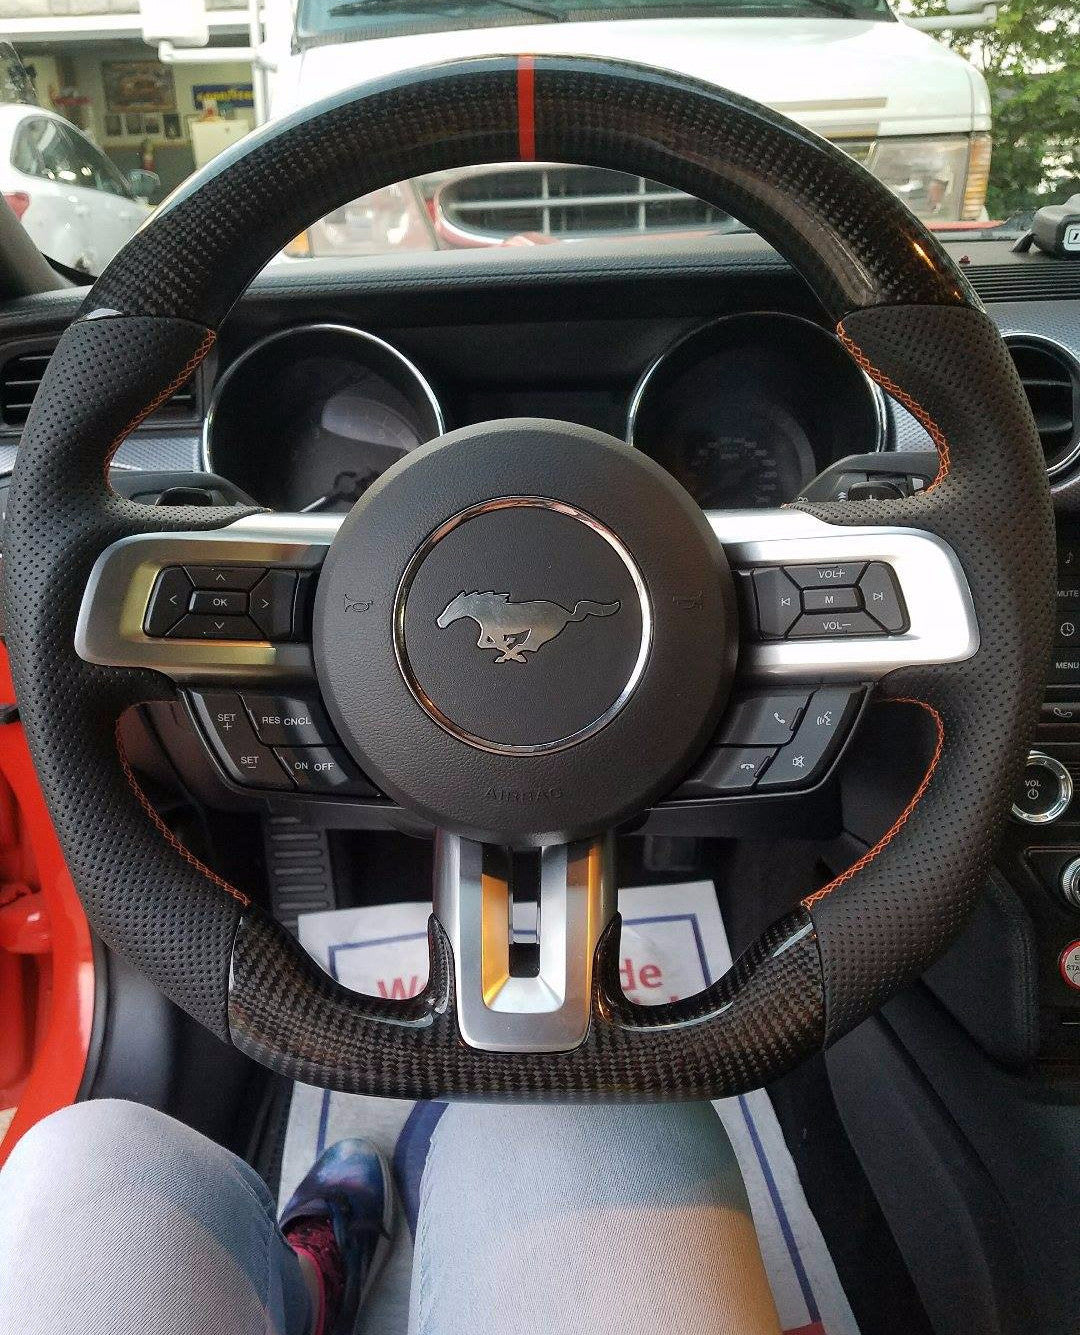 Custom-made Carbon fiber Steering Wheel for 2015 - 2017 Ford Mustang Color & Design Customizable